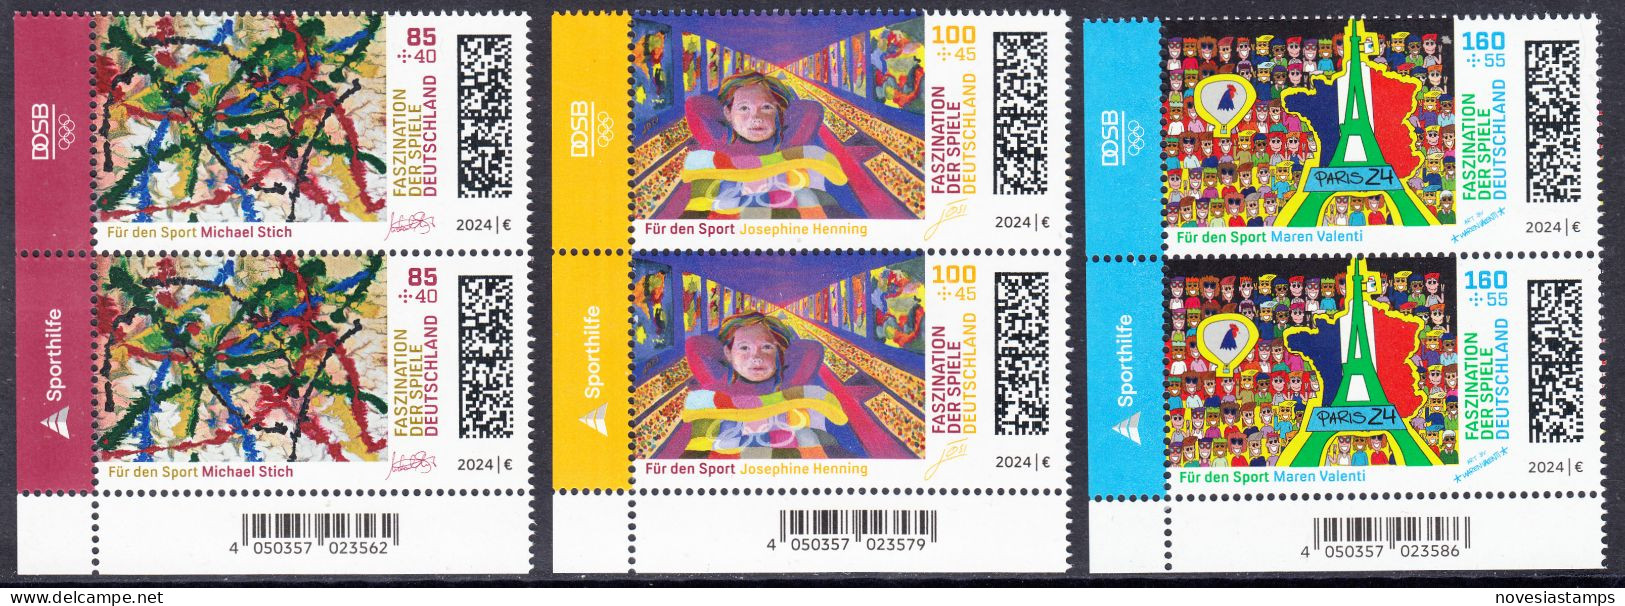 !a! GERMANY 2024 Mi. 3825-3827 MNH SET Of 3 Vert.PAIRS From Lower Left Corners - Olympic Games 2024, Paris - Ungebraucht